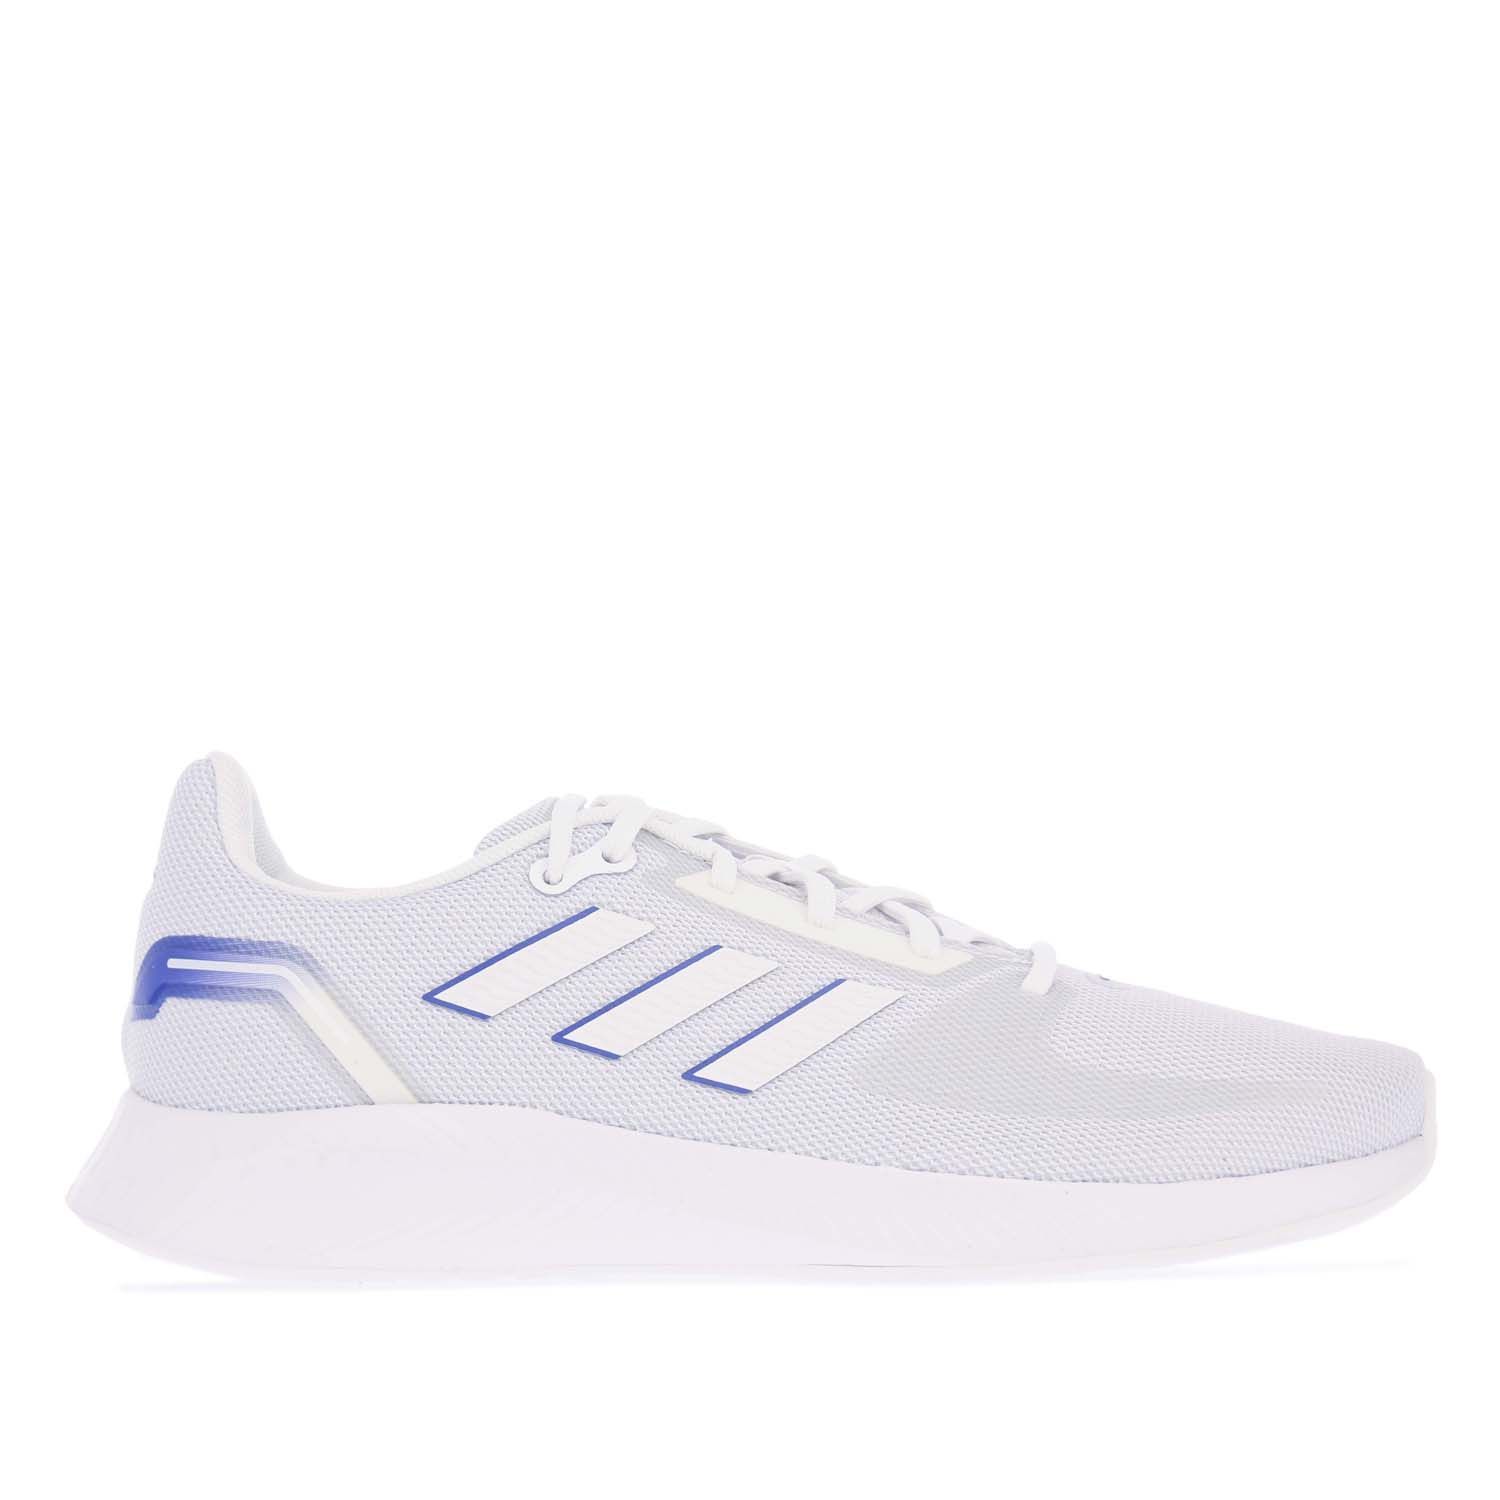 Mens adidas Runfalcon 2.0 Running Shoes in white purple.- Mesh upper.- Lace closure.- Regular fit.- adidas logo on the tongue and heel.- Padded ankle collar. - Lightweight feel.- Cushioning midsole.- Multilayer rubber outsole.- Textile and Synthetic upper  Textile lining  Synthetic sole. - Ref.: FY9626